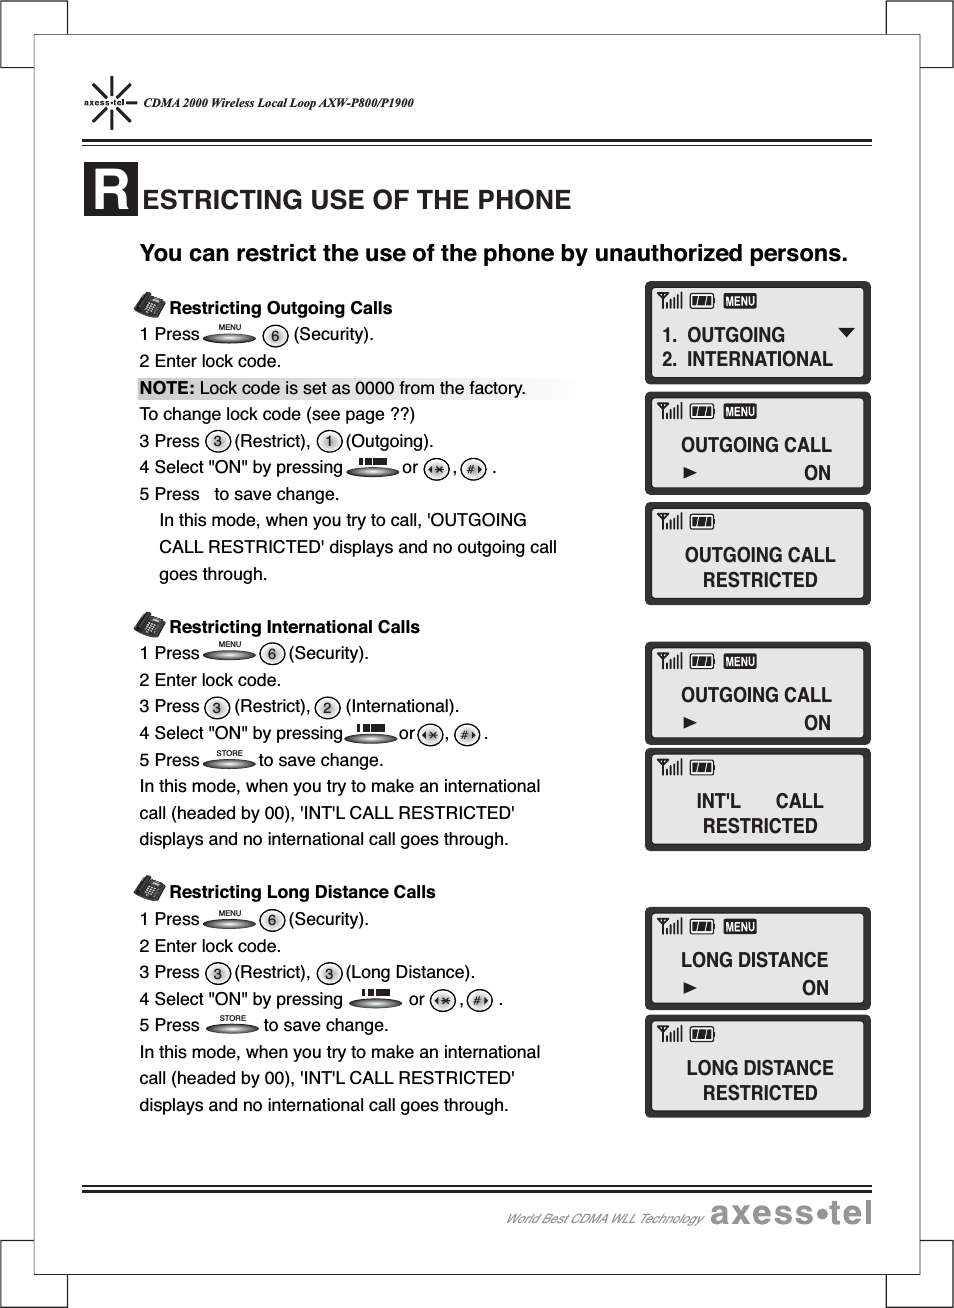 CDMA 2000 Wireless Local Loop AXW-P800/P1900ESTRICTING USE OF THE PHONERYou can restrict the use of the phone by unauthorized persons.Restricting Outgoing Calls1 Press (Security).2 Enter lock code.NOTE: Lock code is set as 0000 from the factory.To change lock code (see page ??)3 Press (Restrict), (Outgoing).4 Select &quot;ON&quot; by pressing or , .5 Press to save change.In this mode, when you try to call, &apos;OUTGOINGCALL RESTRICTED&apos; displays and no outgoing callgoes through.Restricting International Calls1 Press (Security).2 Enter lock code.3 Press (Restrict), (International).4 Select &quot;ON&quot; by pressing or , .5 Press to save change.In this mode, when you try to make an internationalcall (headed by 00), &apos;INT&apos;L CALL RESTRICTED&apos;displays and no international call goes through.Restricting Long Distance Calls1 Press (Security).2 Enter lock code.3 Press (Restrict), (Long Distance).4 Select &quot;ON&quot; by pressing or , .5 Press to save change.In this mode, when you try to make an internationalcall (headed by 00), &apos;INT&apos;L CALL RESTRICTED&apos;displays and no international call goes through.3 363 263 16STORESTOREMENUMENUMENU12546890#37MENUCLEARSTORERECALLPOWERMESSAGEABCDEFGHIJKLMNOPQRSTUVWXYZOPER12546890#37MENUCLEARSTORERECALLPOWERMESSAGEABCDEFGHIJKLMNOPQRSTUVWXYZOPER12546890#37MENUCLEARSTORERECALLPOWERMESSAGEABCDEFGHIJKLMNOPQRSTUVWXYZOPERWorld Best CDMA WLL Technology1. OUTGOING2. INTERNATIONALOUTGOING CALLONOUTGOING CALLONLONG DISTANCEONOUTGOING CALLRESTRICTEDINT&apos;L CALLRESTRICTEDLONG DISTANCERESTRICTED